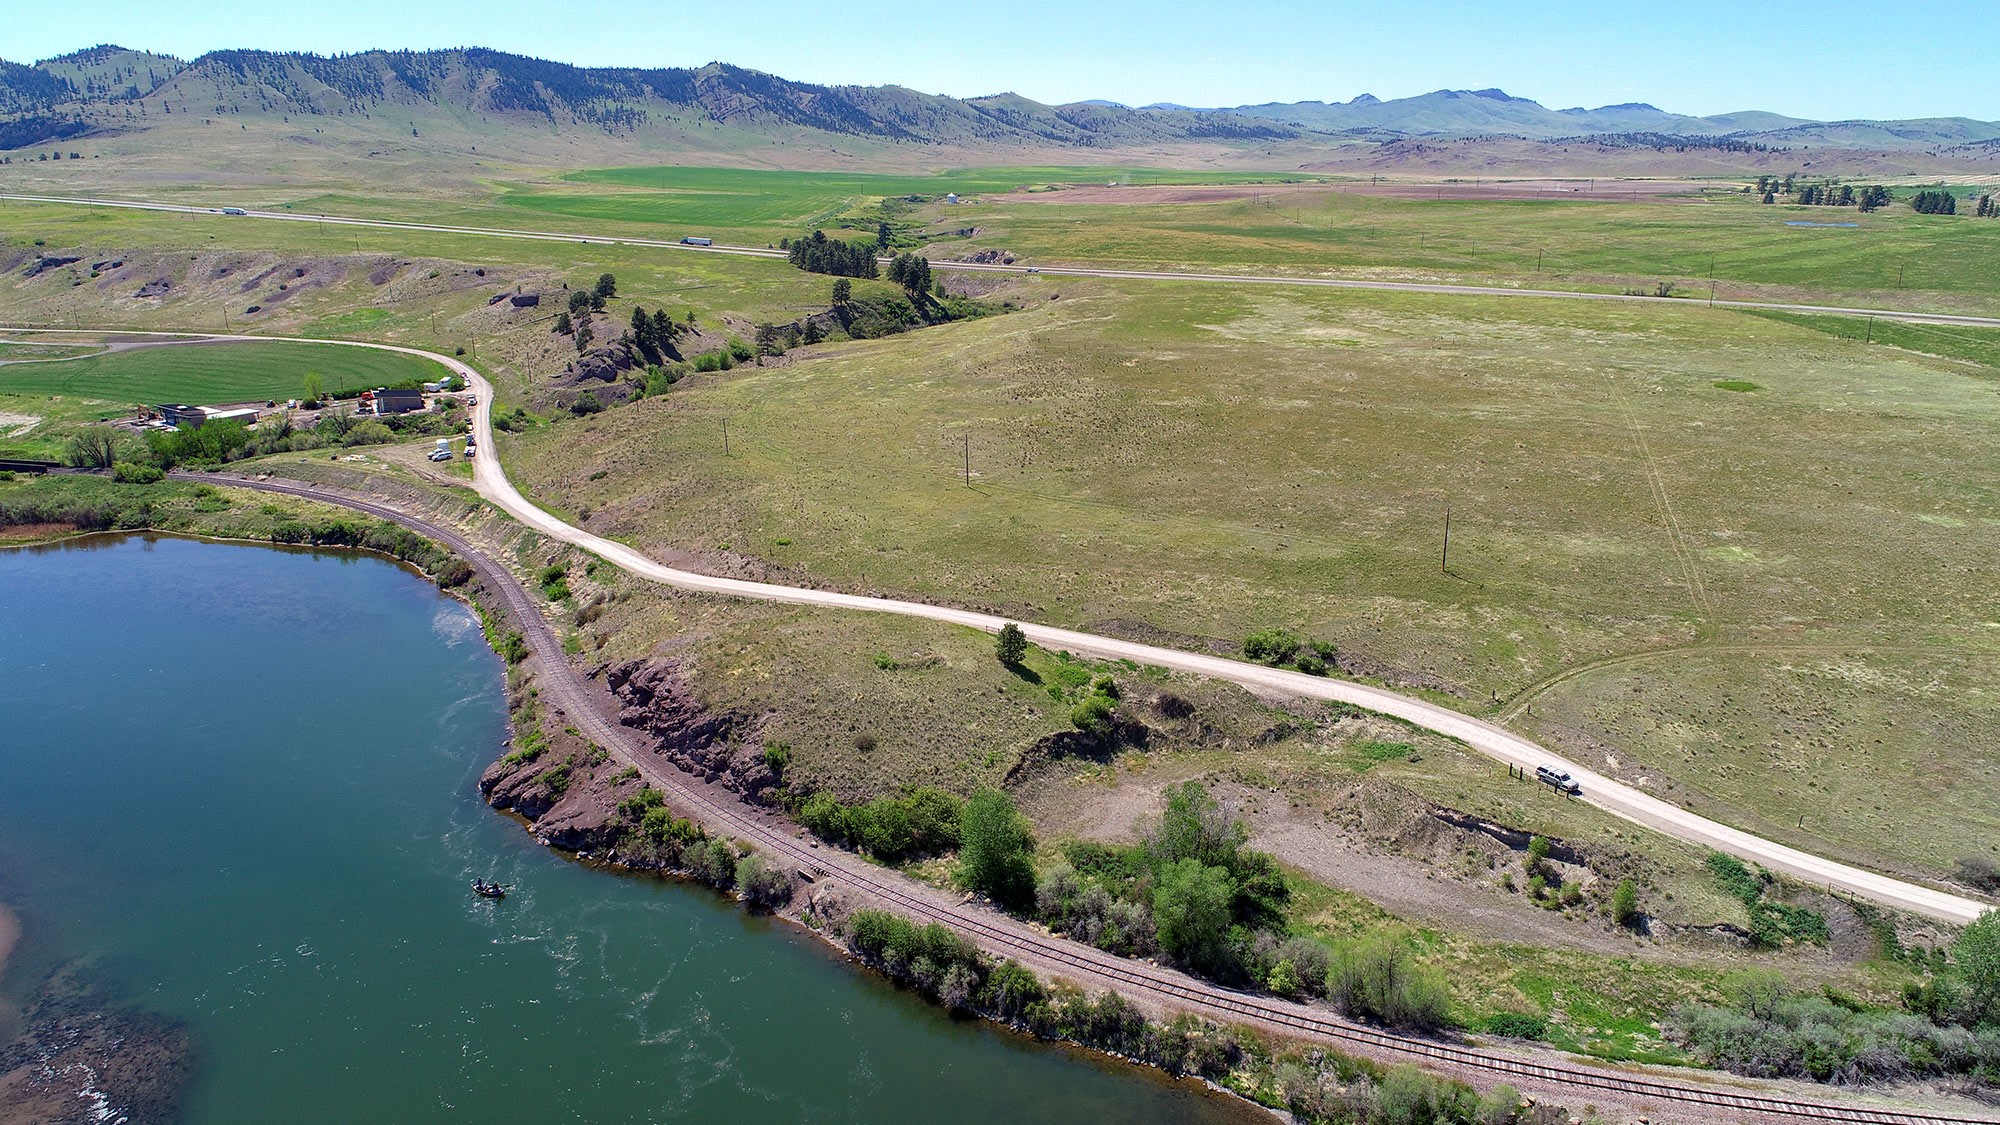 Invest in a hard-to-come-by 14 acres in the fly fishing destination Craig, Montana. The acreage offers phenomenal Missouri River and canyon views and is just off the paved Craig River Road with close proximity to town and services. The acreage is unique because it is divided by the road, so you have acreage almost ON the river with the bulk of the acreage on the hill above.  Let your imagination go wild with uses since there is NO ZONING and Craig is not an incorporated city, so no strict city rules. Build multiple houses on each lot? Take advantage of the high visibility above the river and build a commercial entity. Call Lynn Kenyon at 406-770-0013 or your real estate professional. Build your dream home on one side and use the other side for commercial. The possibilities are really endless and the traffic to Craig is brisk. Buyer to confirm all uses with county and state planning and health departments. Craig brings in thousands to fly fish and float on the river and recreate at nearby Holter Lake. Craig is nearly half way between Helena and Great Falls, so commutable. Buyers to verify all representations to their own satisfaction.